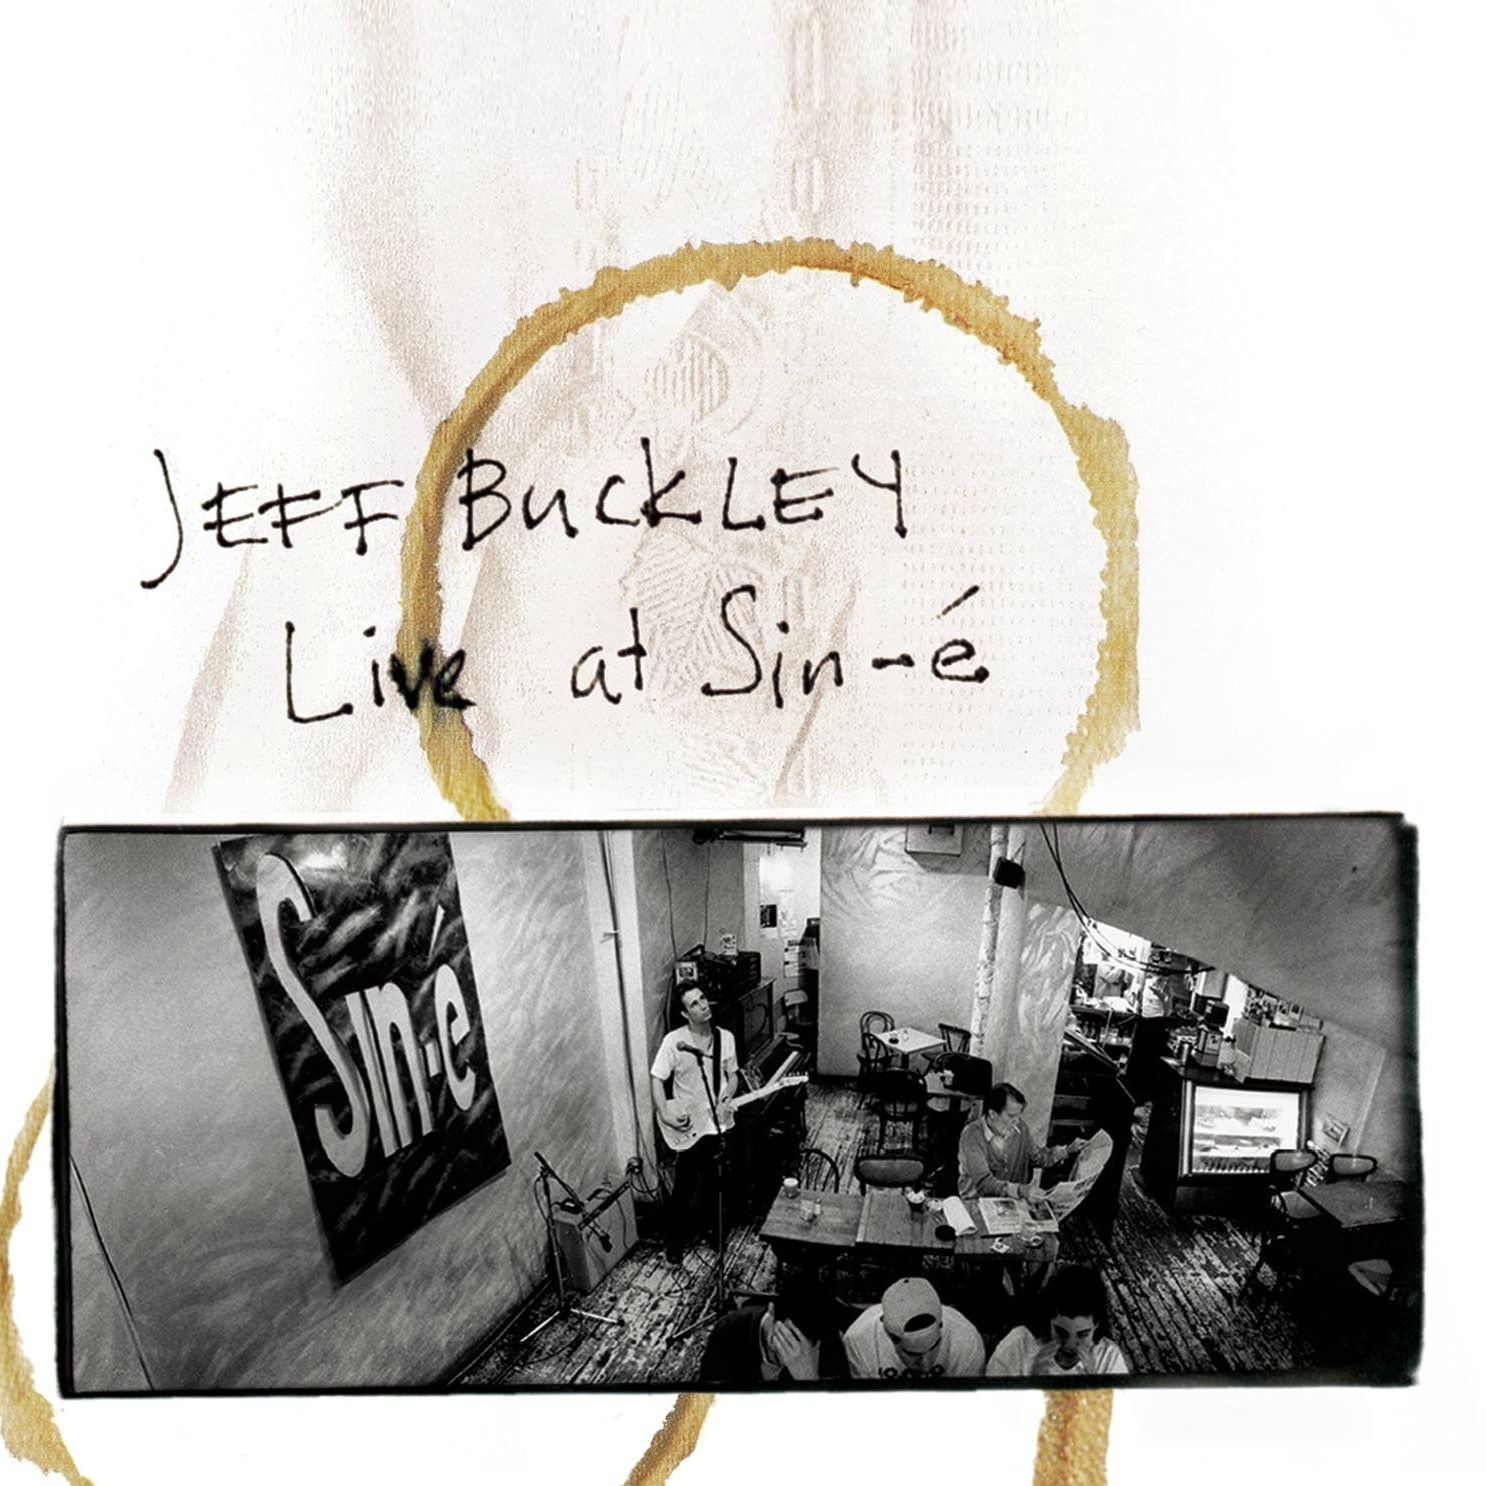 JEFF BUCKLEY | 'Live at Sin-e' (Legacy Edition) 4xLP